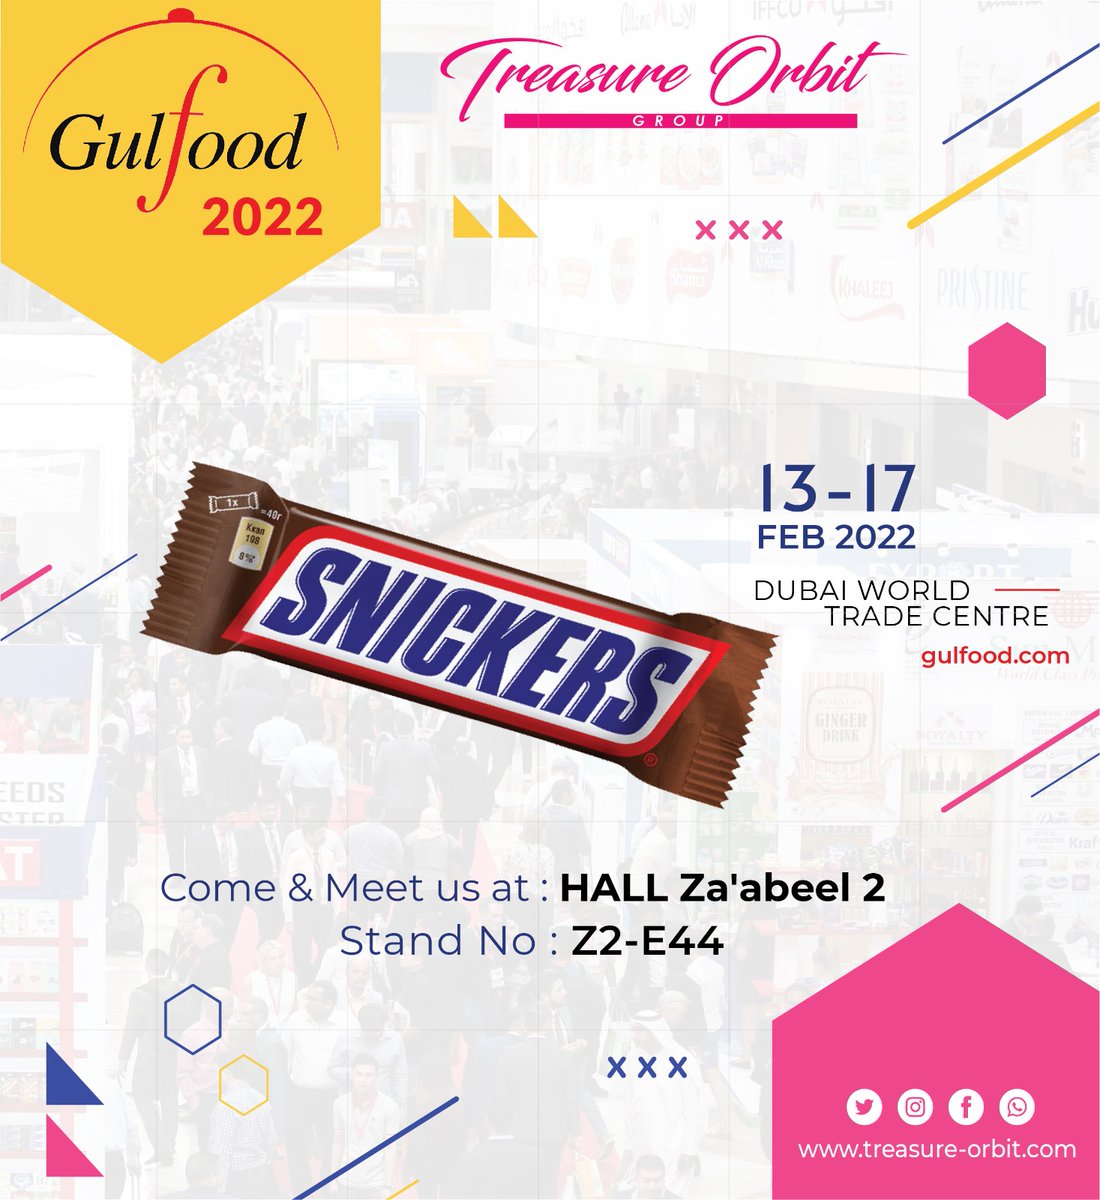 #1Daystogo #snickers @Gulfood 

Learn more about our products and meet us at stand No: Z2-E44 at the hall Za'abeel 2.

#gulfood2022 #exhibition #foodexhibition #fmcg
#gulfoodexhibitors #chocolate #distributors #tro #treasureorbit